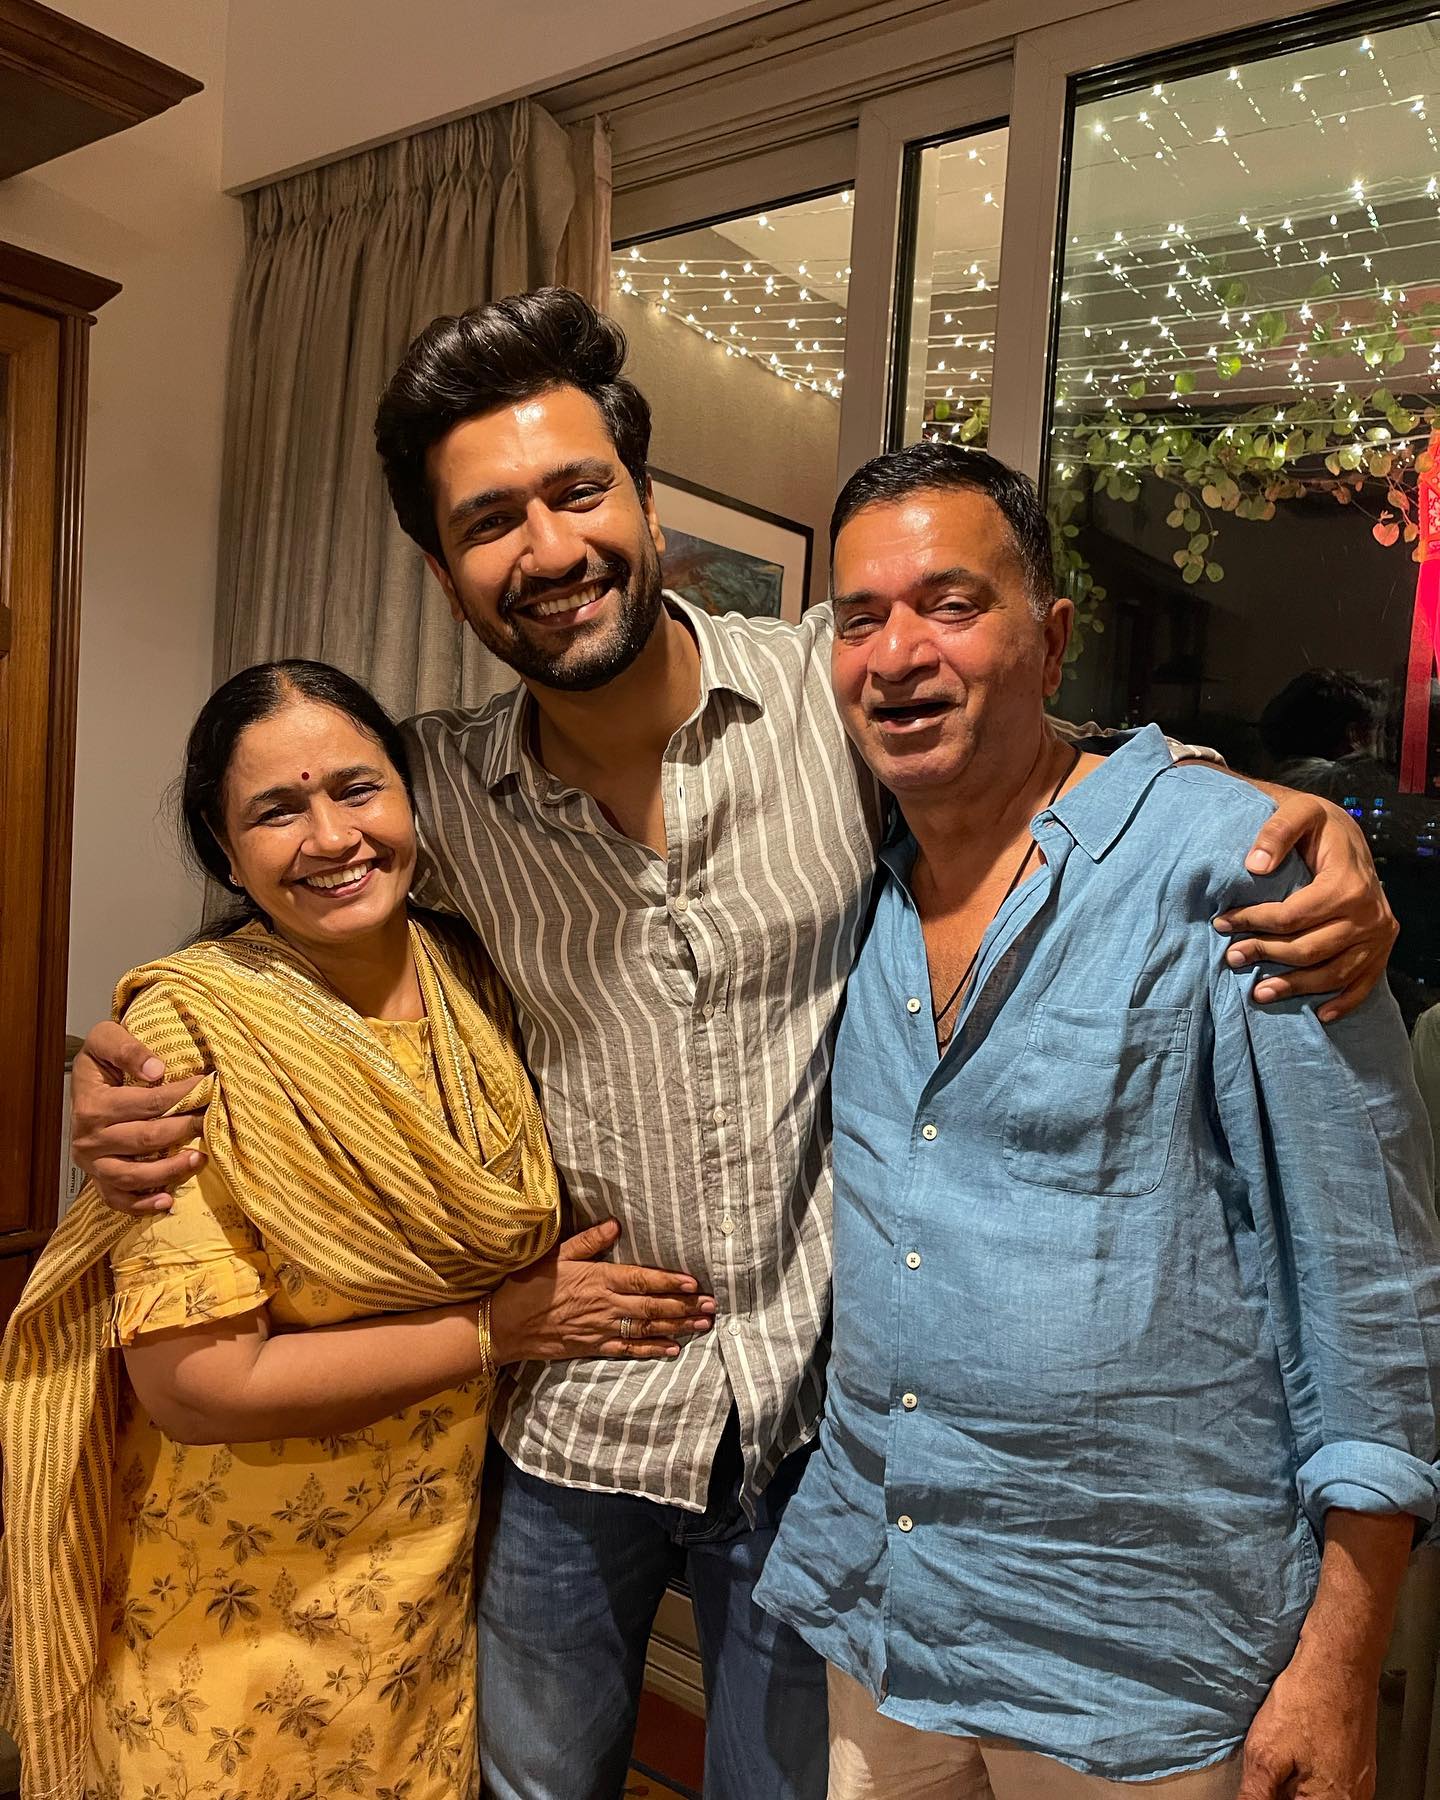 251551143 365484438687279 8083367448527361399 n Birthday Special: Vicky Kaushal used to live in a chawl at one time, today he is the owner of property worth so many crores, he lives a luxurious life